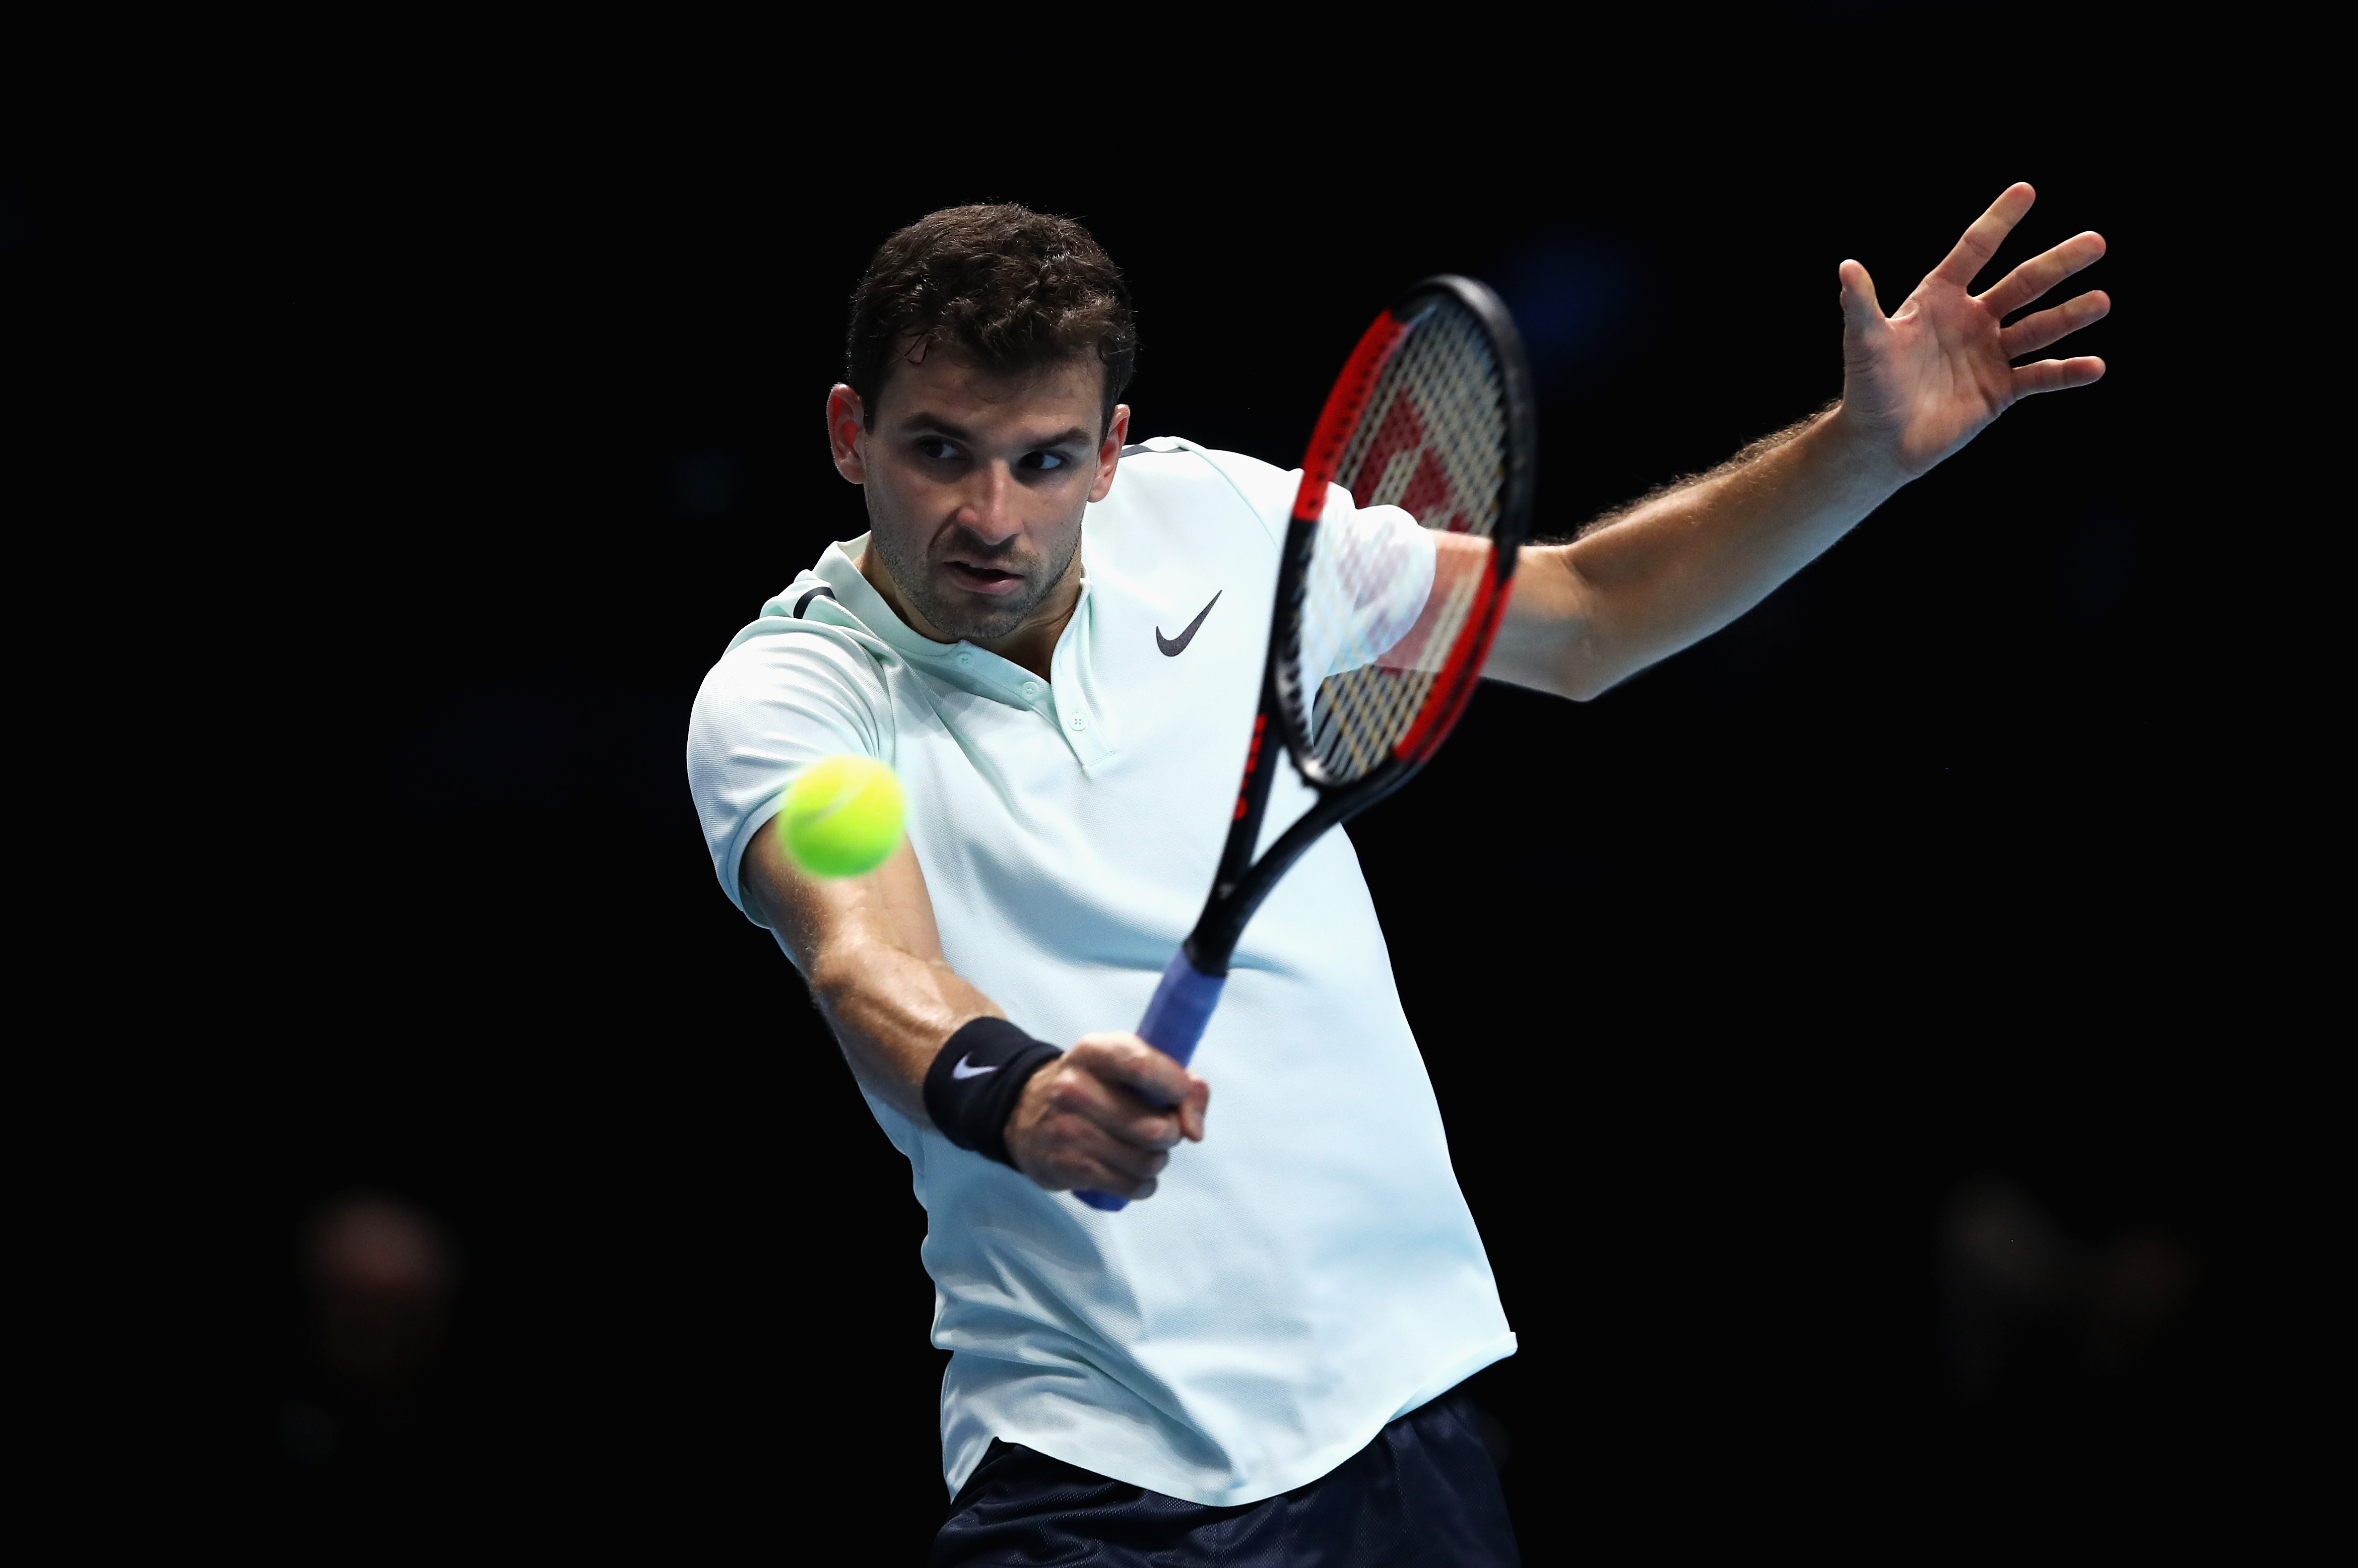 Grigor Dimitrov replaces Roger Federer as top seed in Dubai Championship